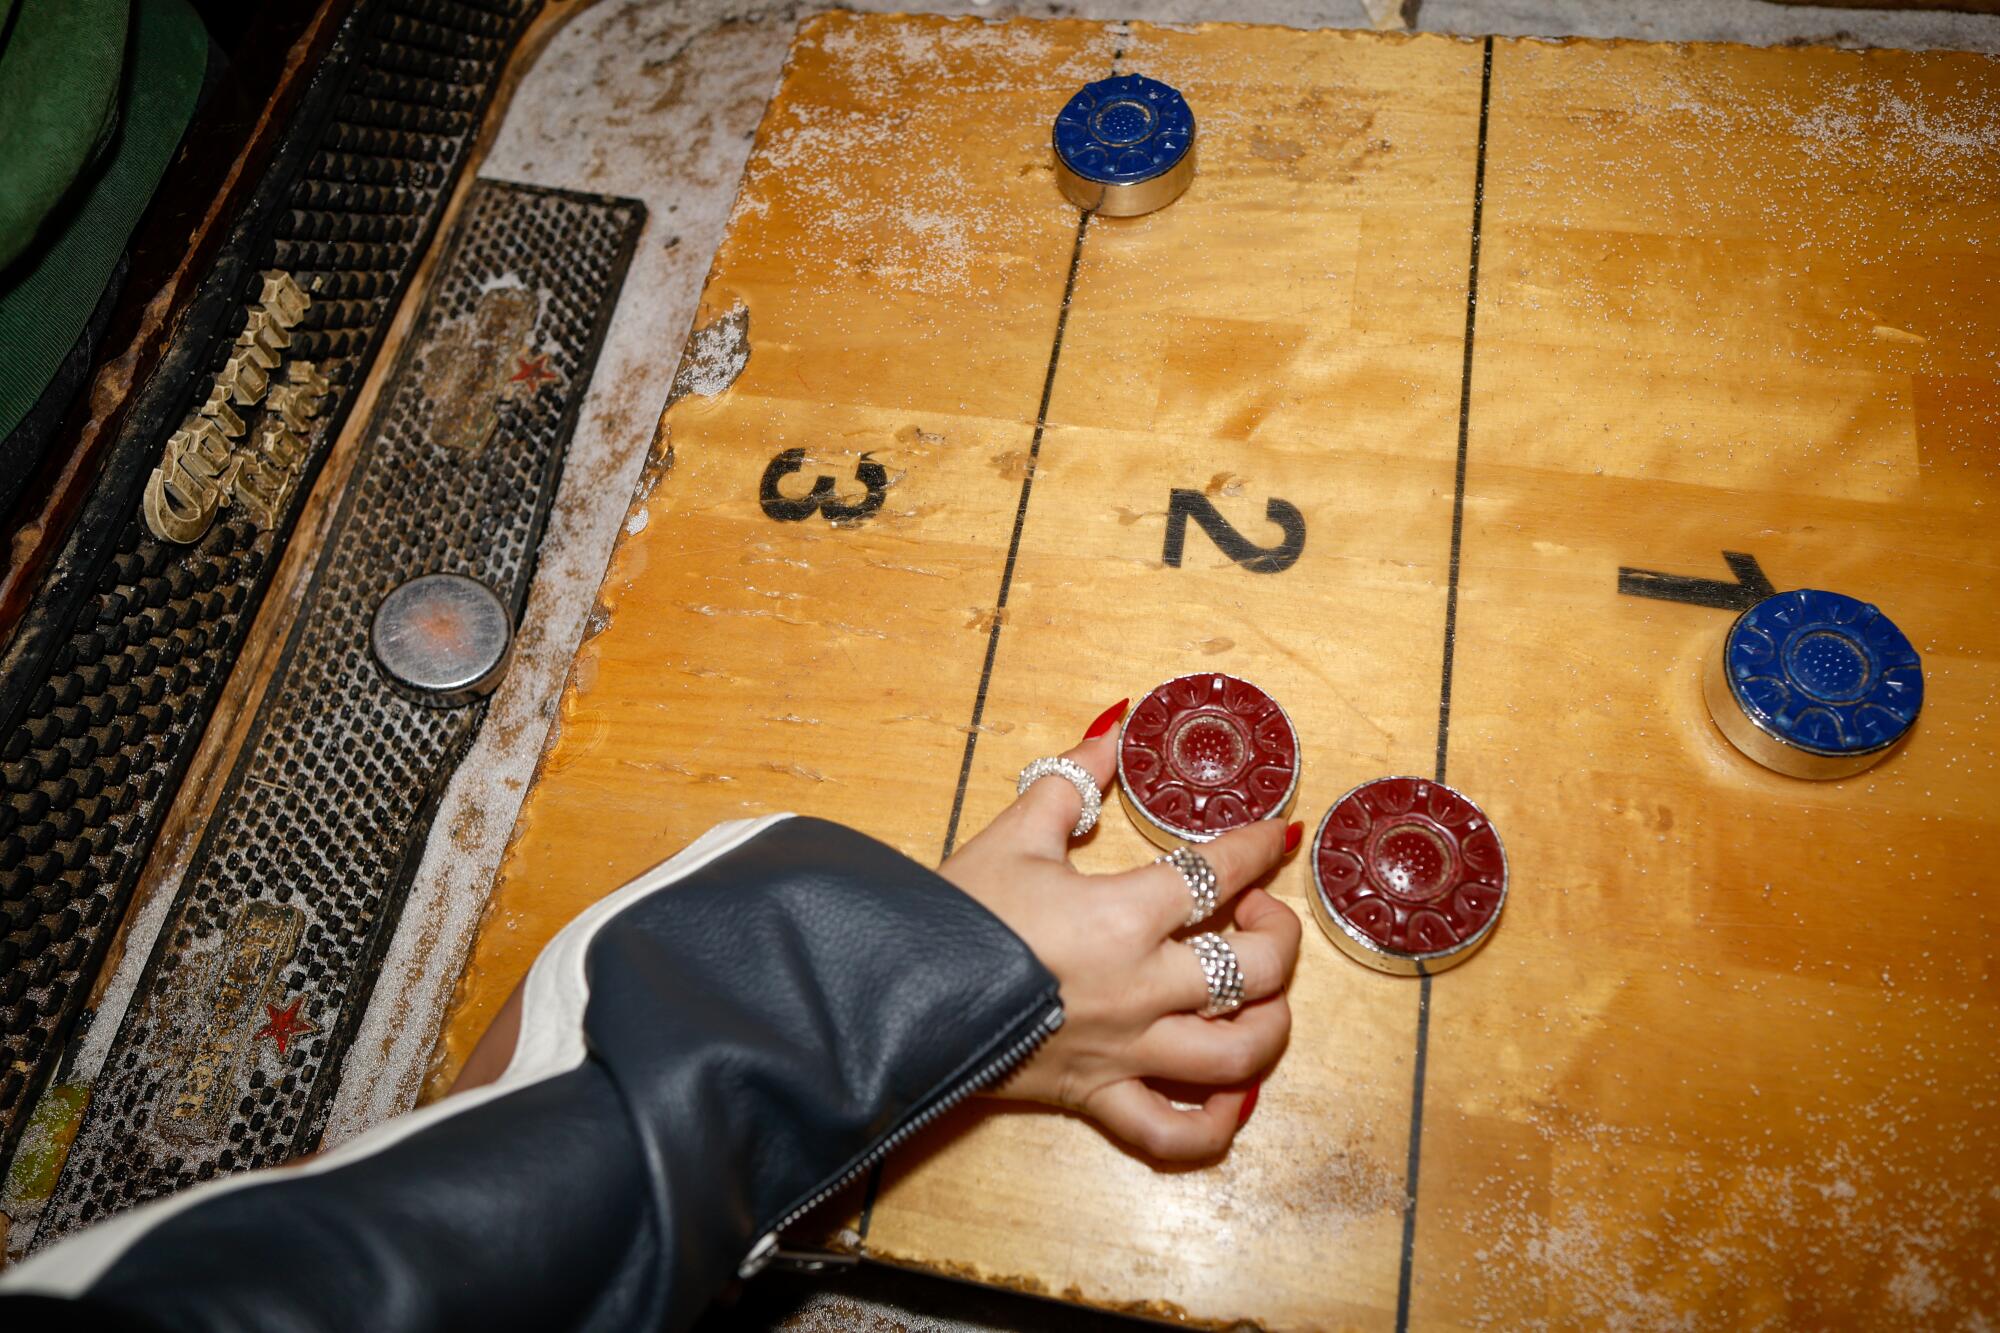 A well-used shuffleboard sees some action on a bustling Saturday night at Barney's Beanery.